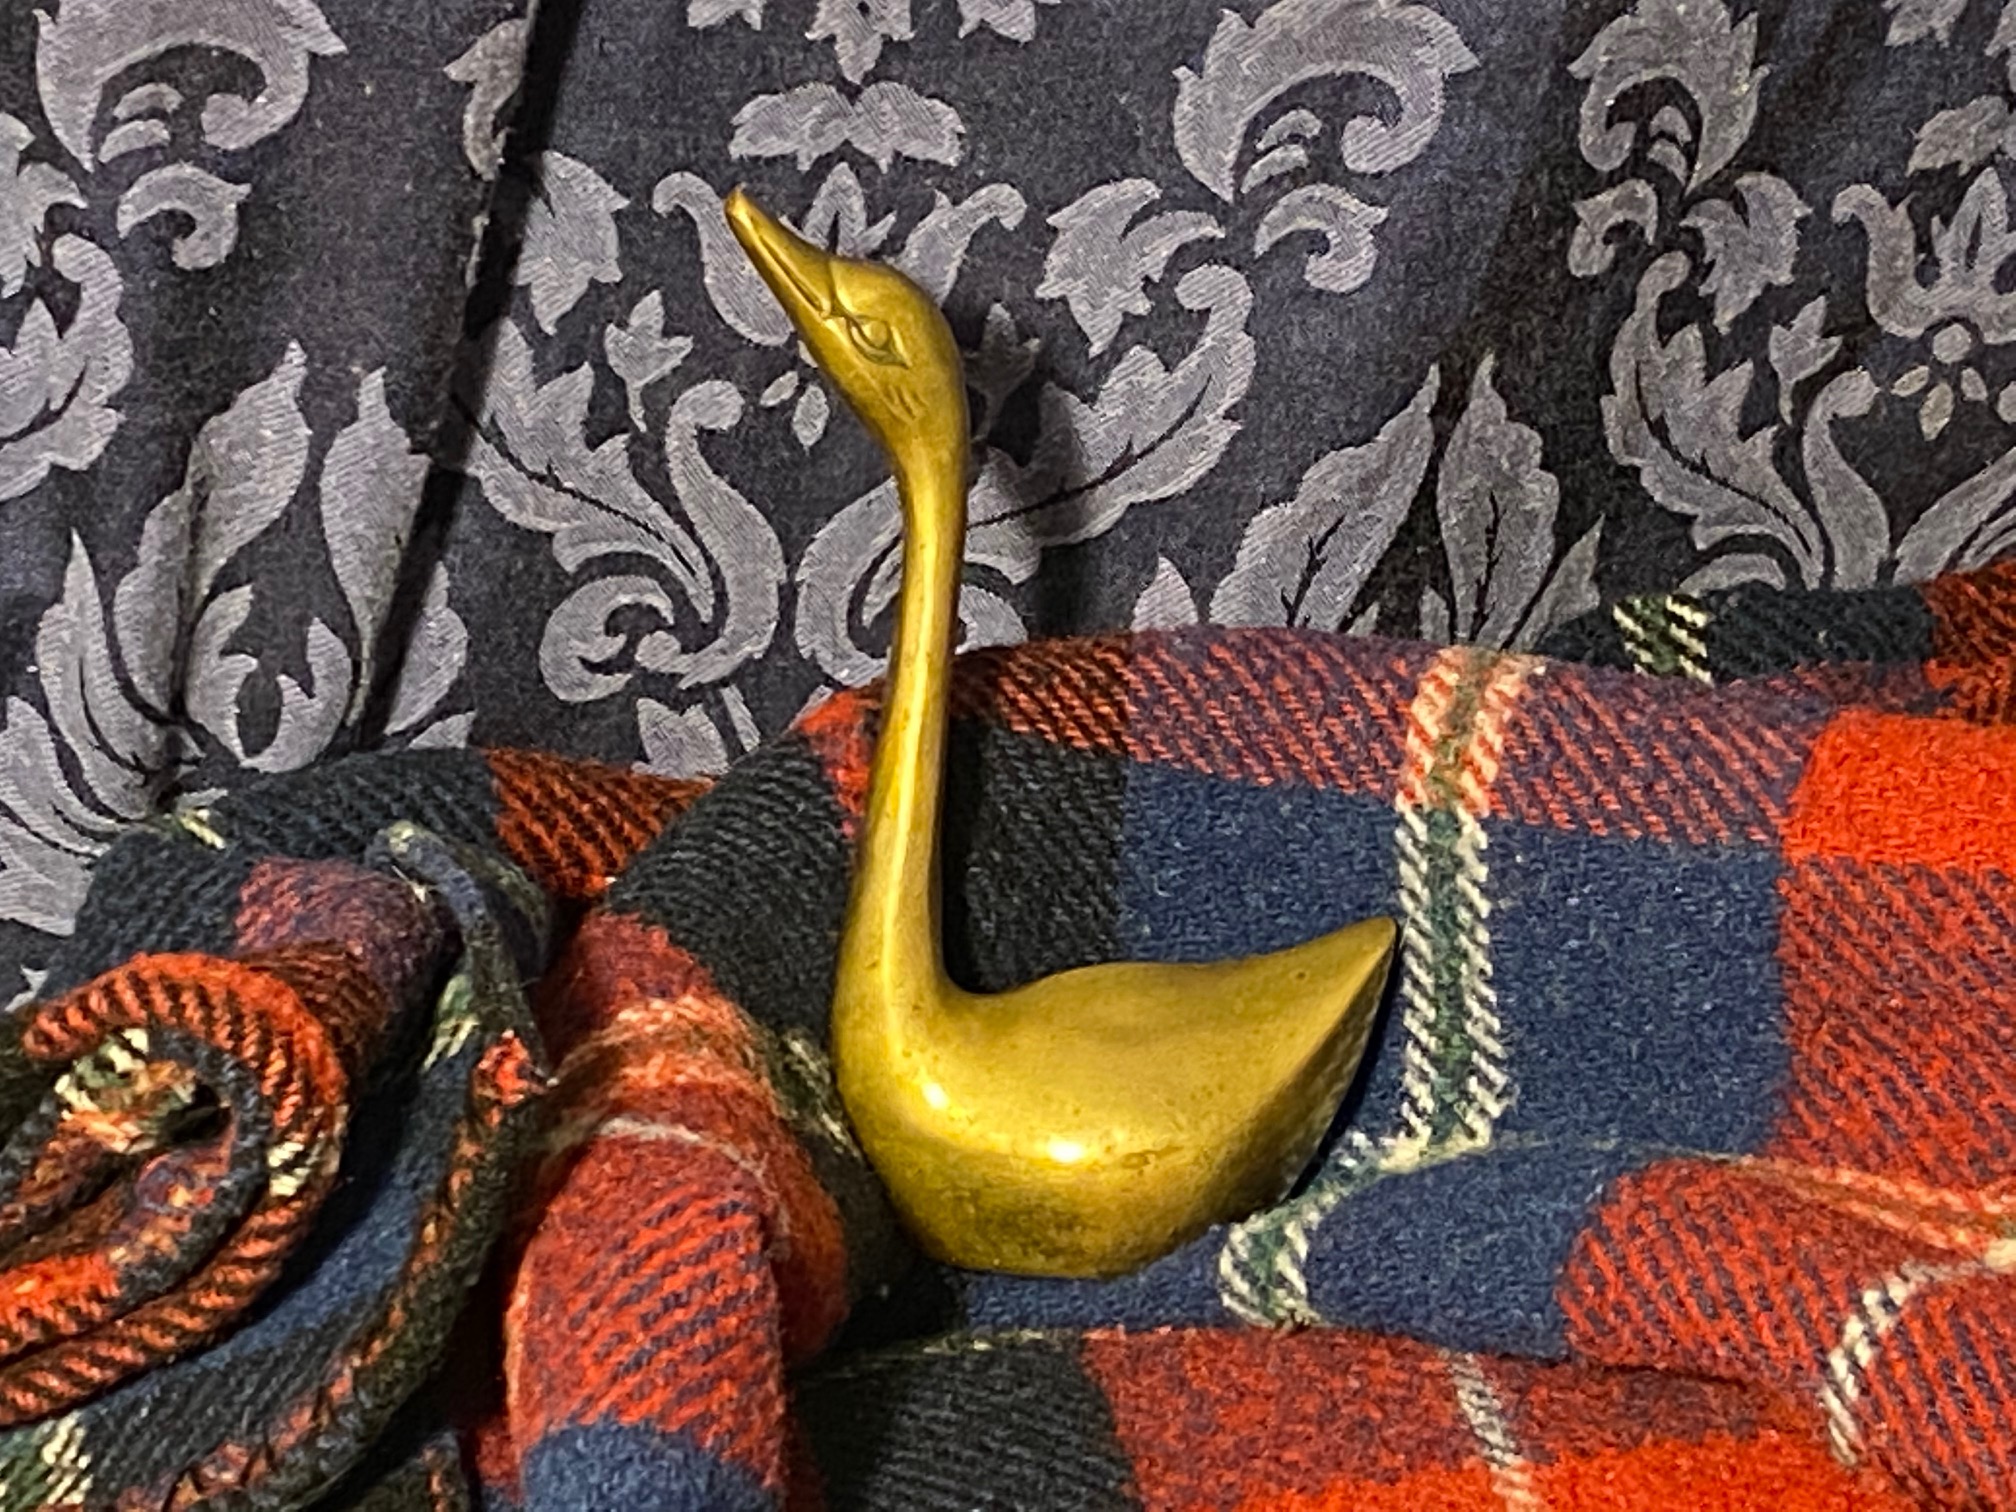 Brass swan figurine, made in Korea: 23,500 ppm Lead (90 ppm is unsafe for  kids) + 388 ppm Antimony.